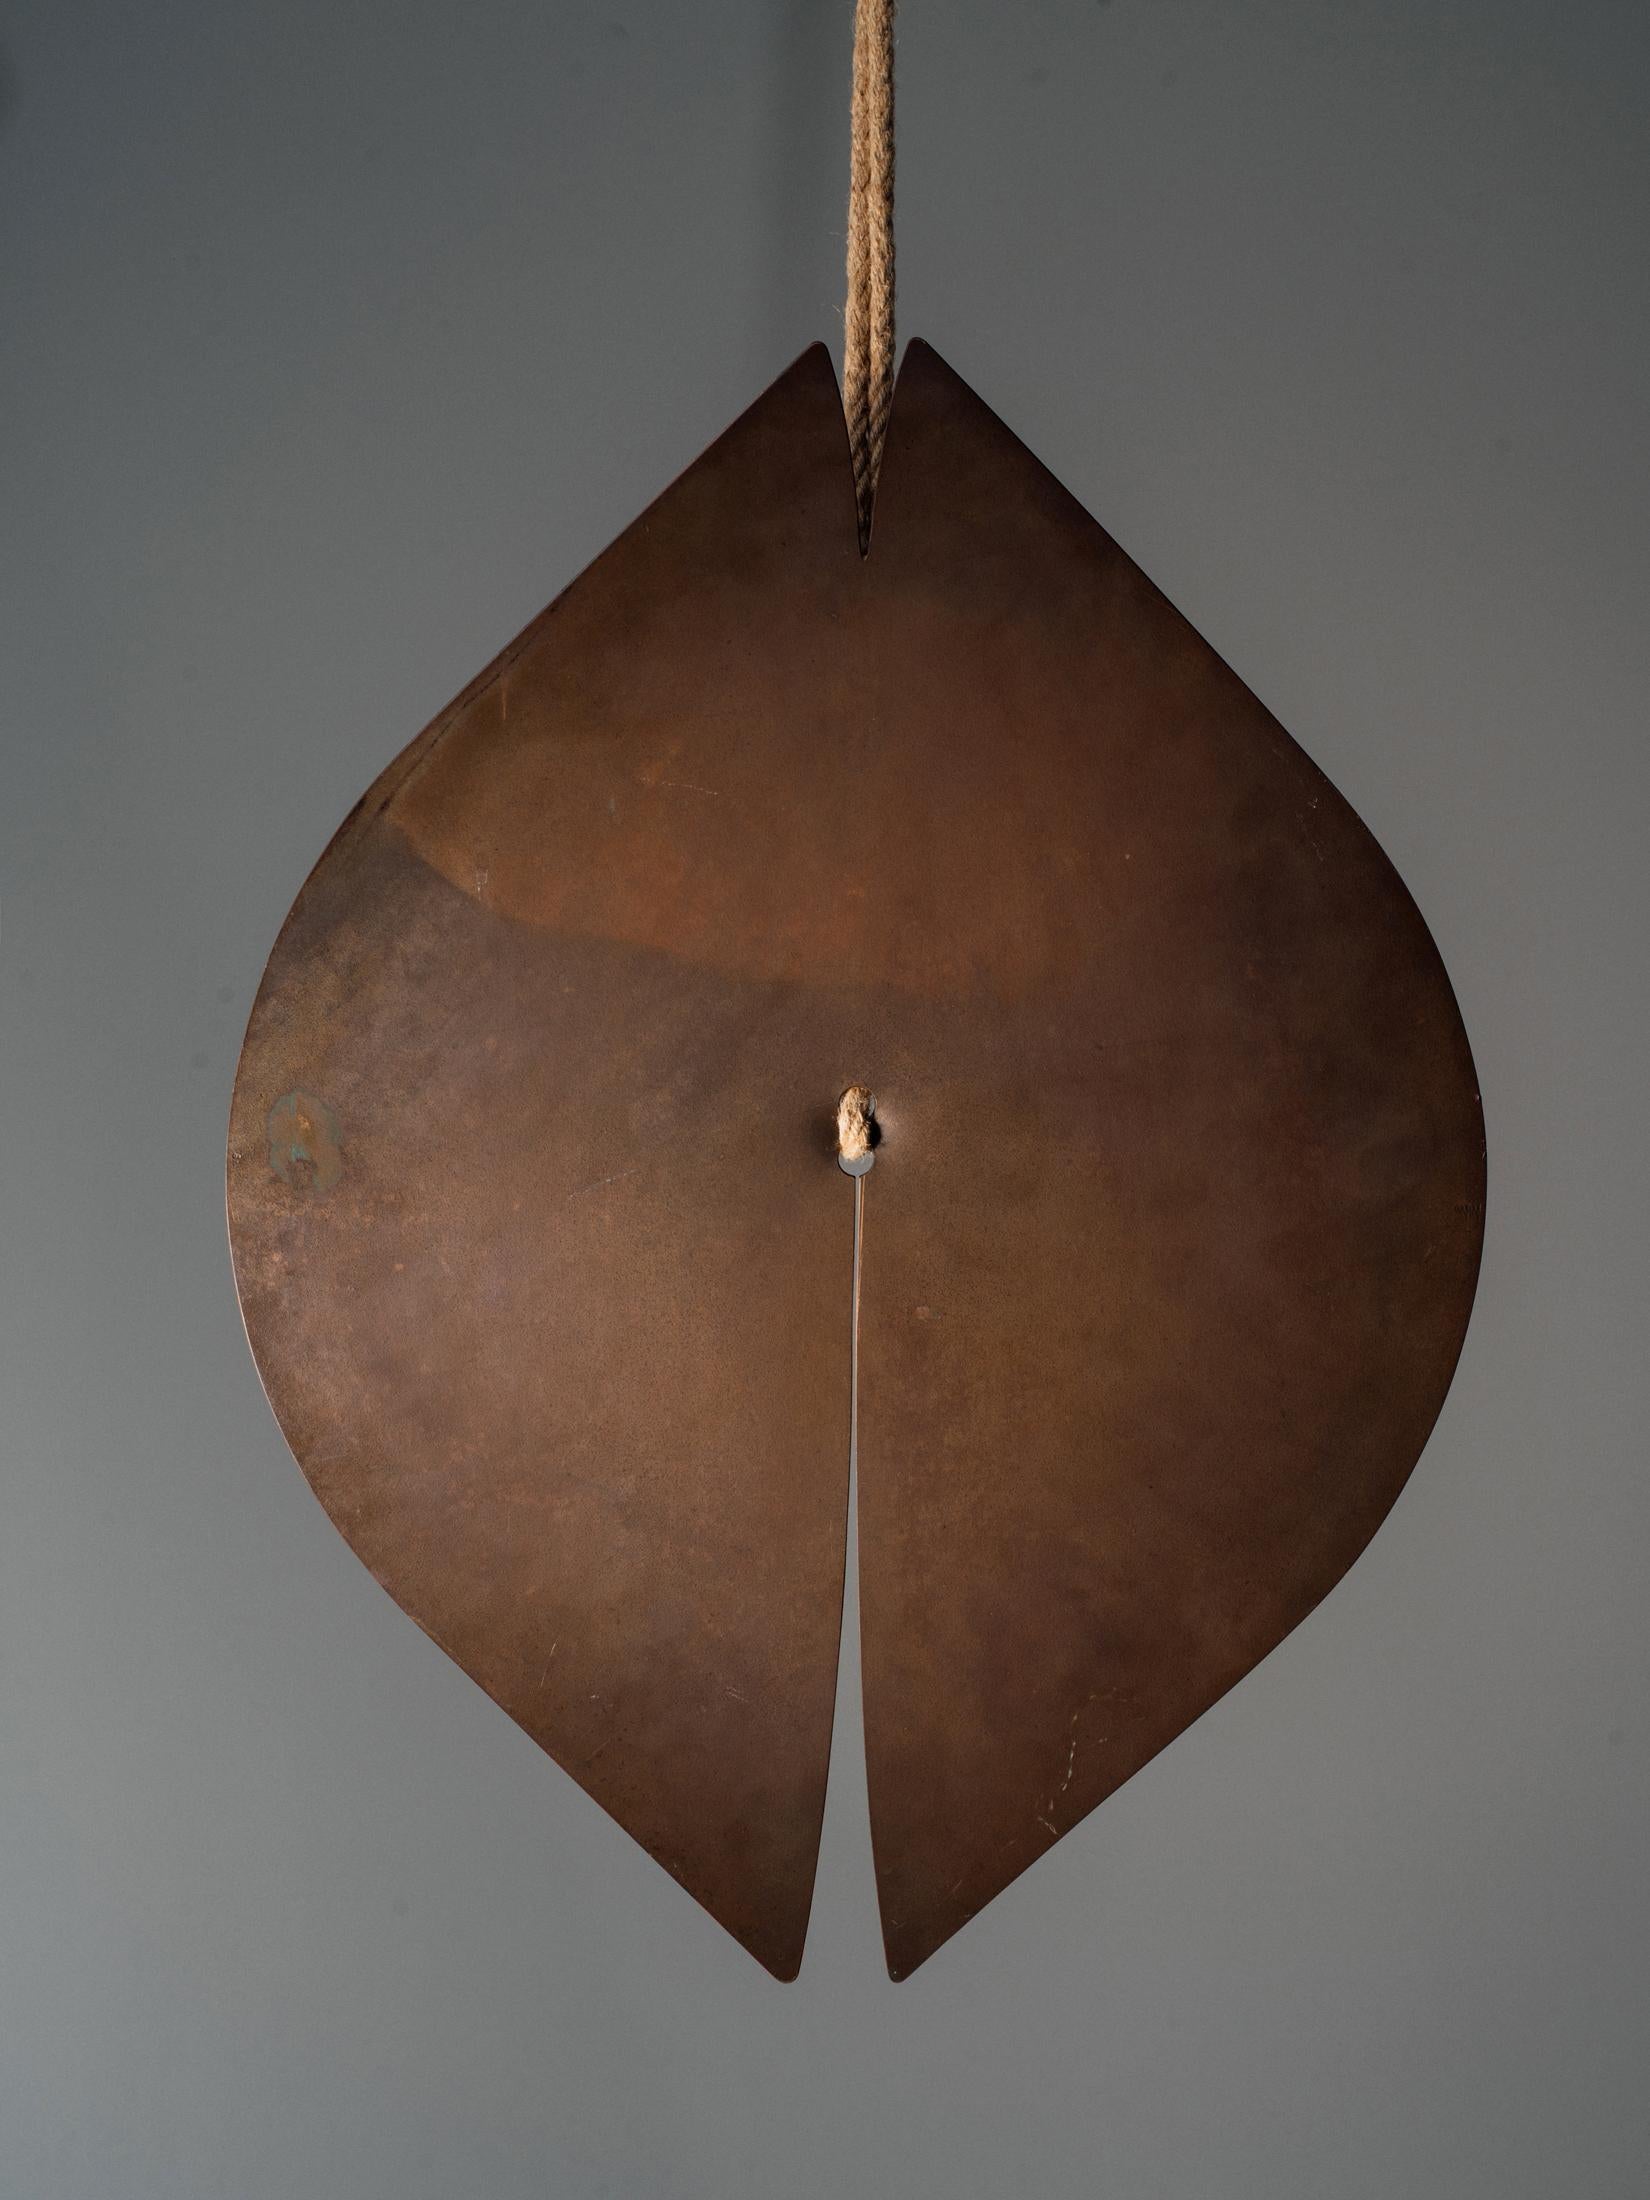 A sublime, single slab gong in cut, hammered and drilled brass by Harry Bertoia with slits at either end, suspended by jute cord. Beautiful scale with surface exhibiting original, untouched patina commensurate with age. Offered with certificate of